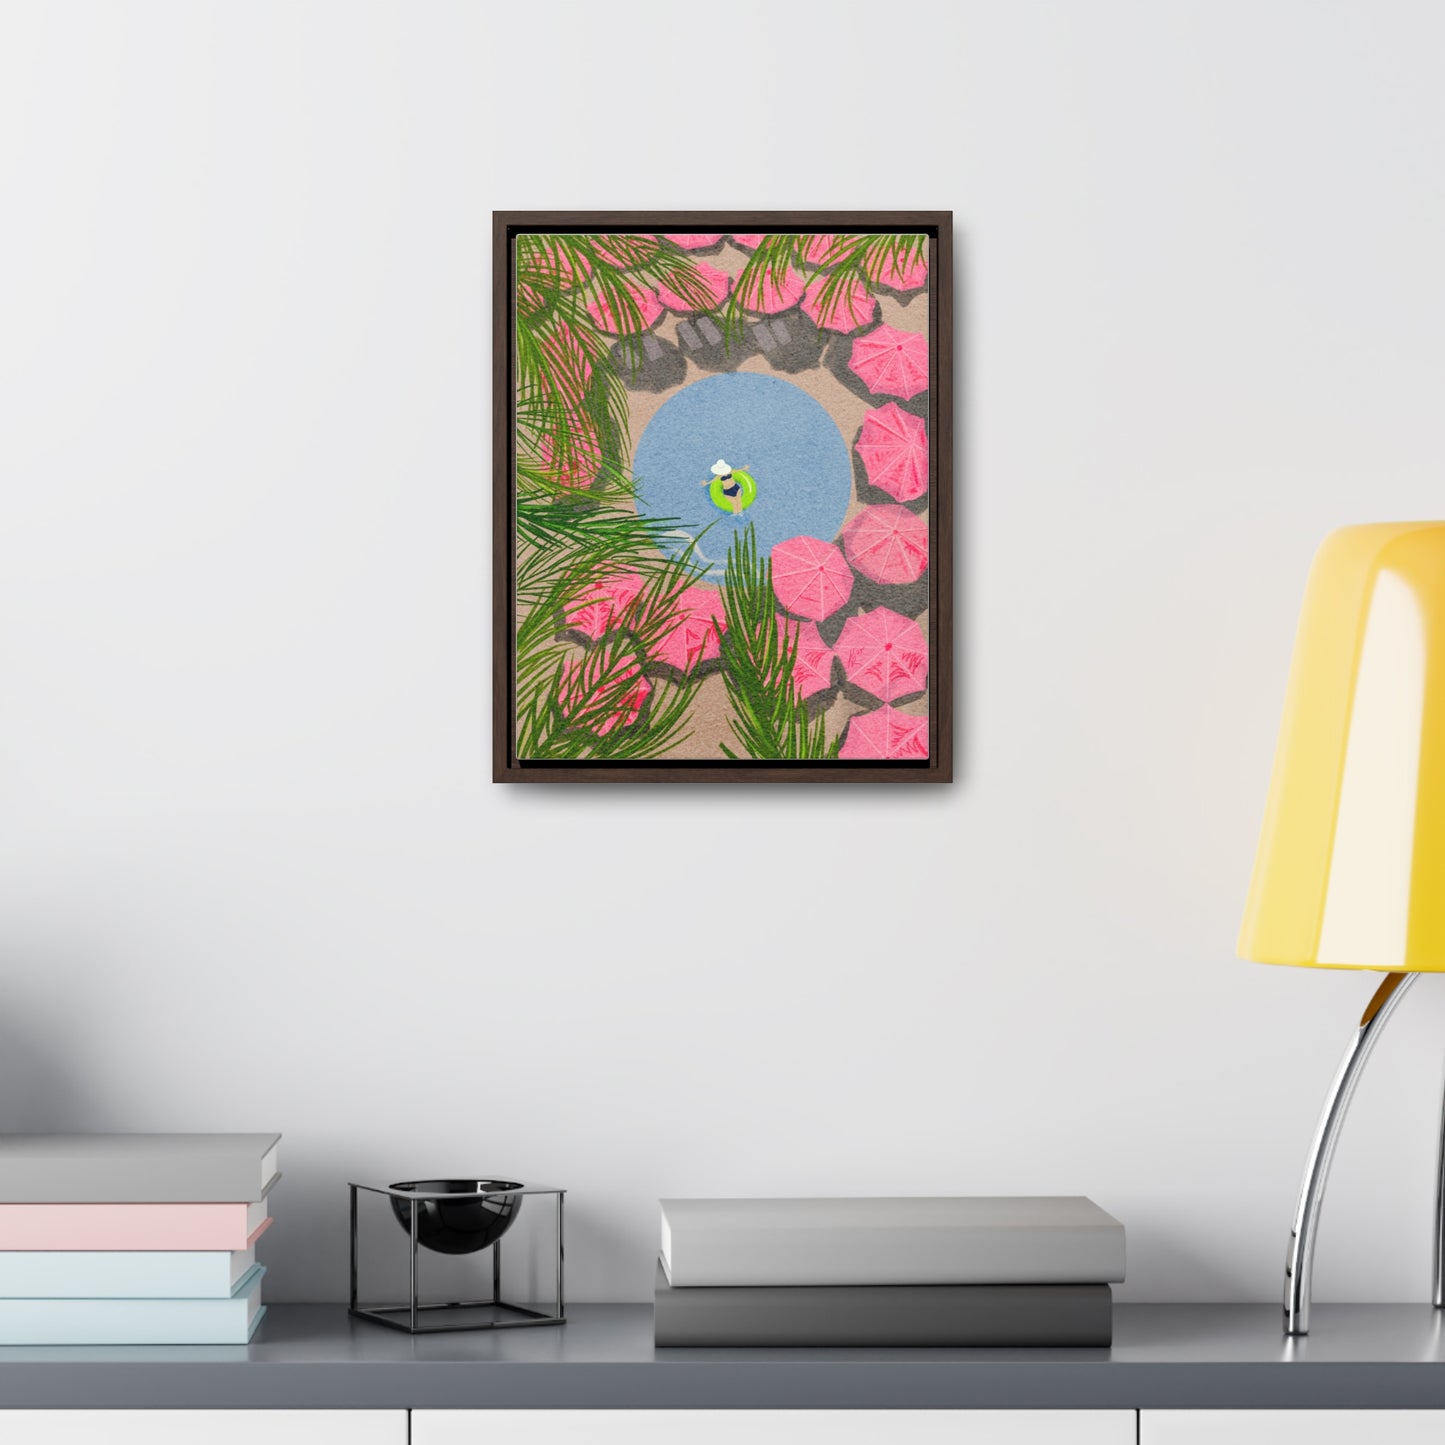 Chill'n Canvas Giclee, Framed